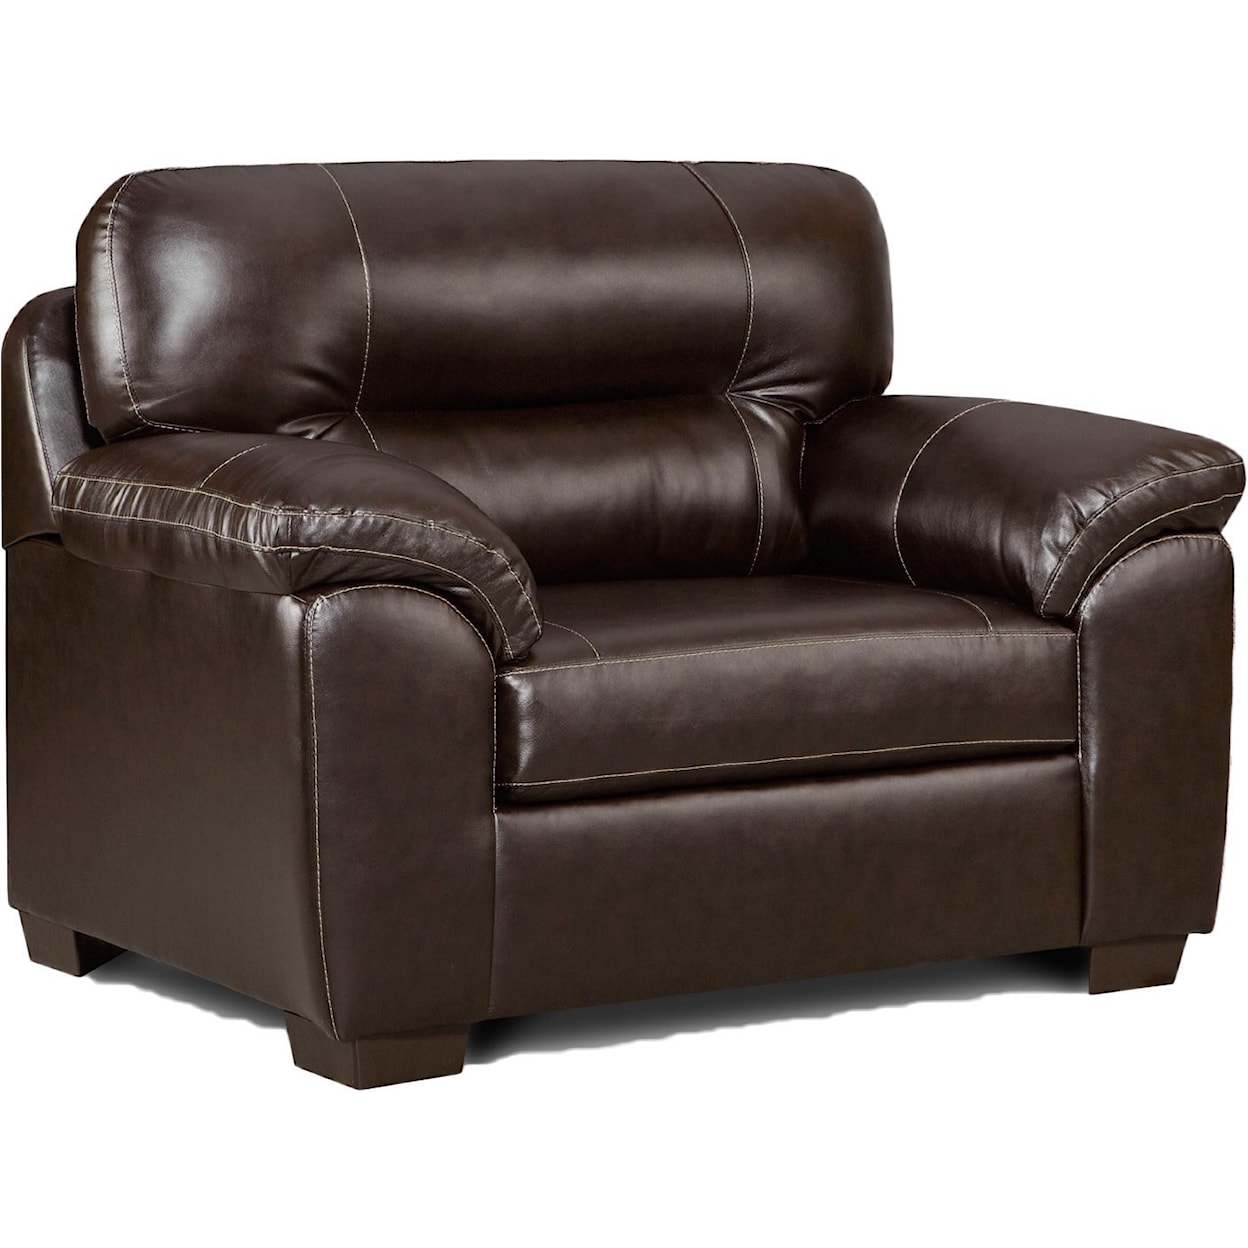 Affordable Furniture Easton EASTON CHOCOLATE CHAIR |